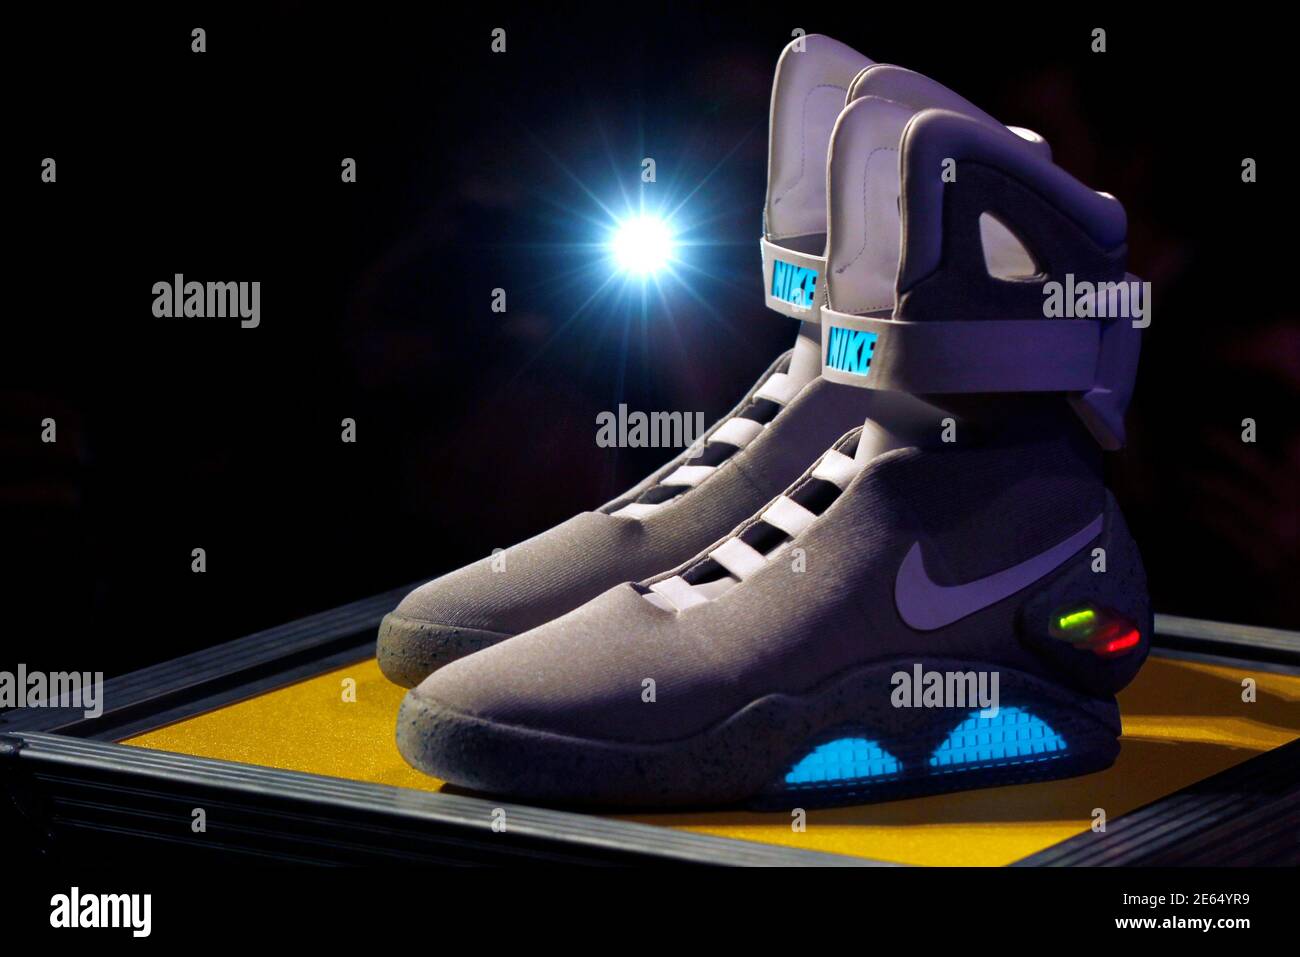 A pair of 2011 NIKE MAG shoes, based on the original NIKE MAG worn in 2015  by the "Back to the Future" character Marty McFly, played by Michael J.  Fox, is displayed